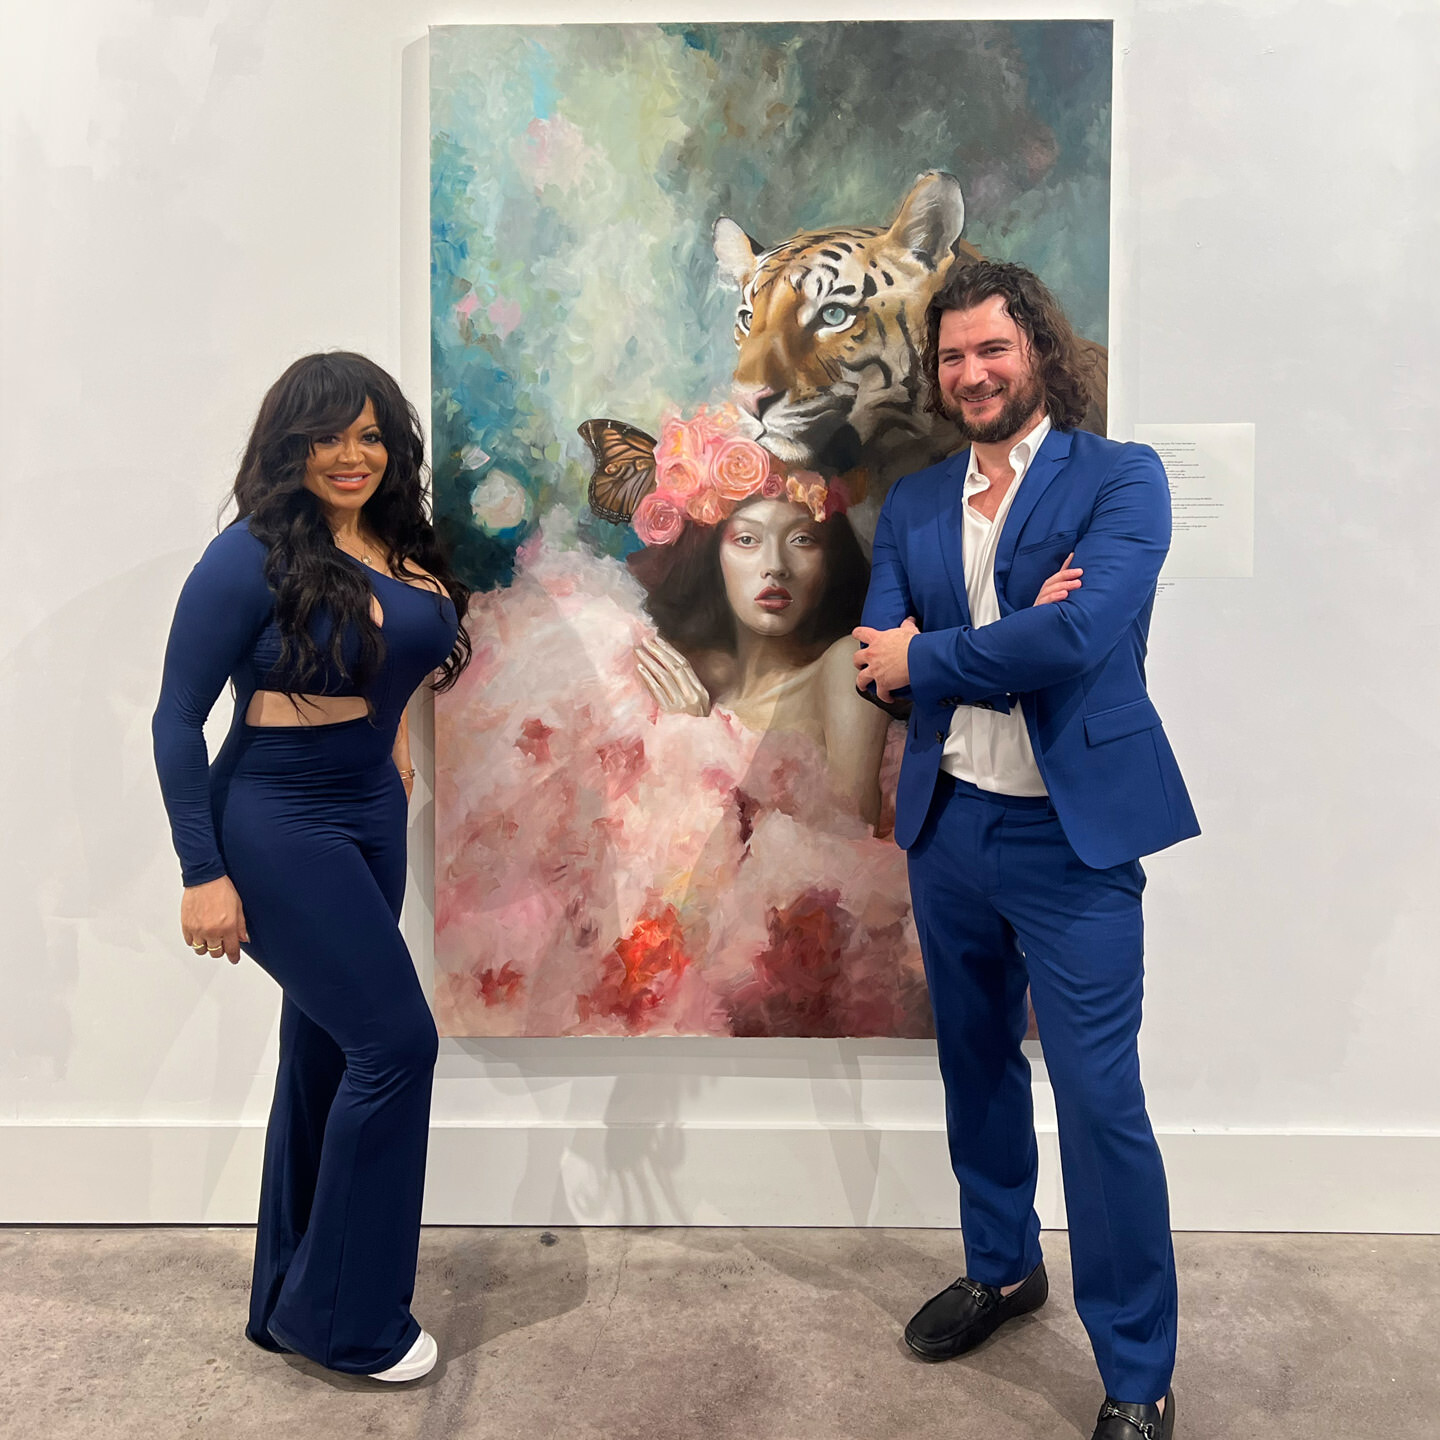 Artist Alex Righetto in a blue suit and Stacy in a blue outfit standing beside the 'The Guardian' painting at an art gallery